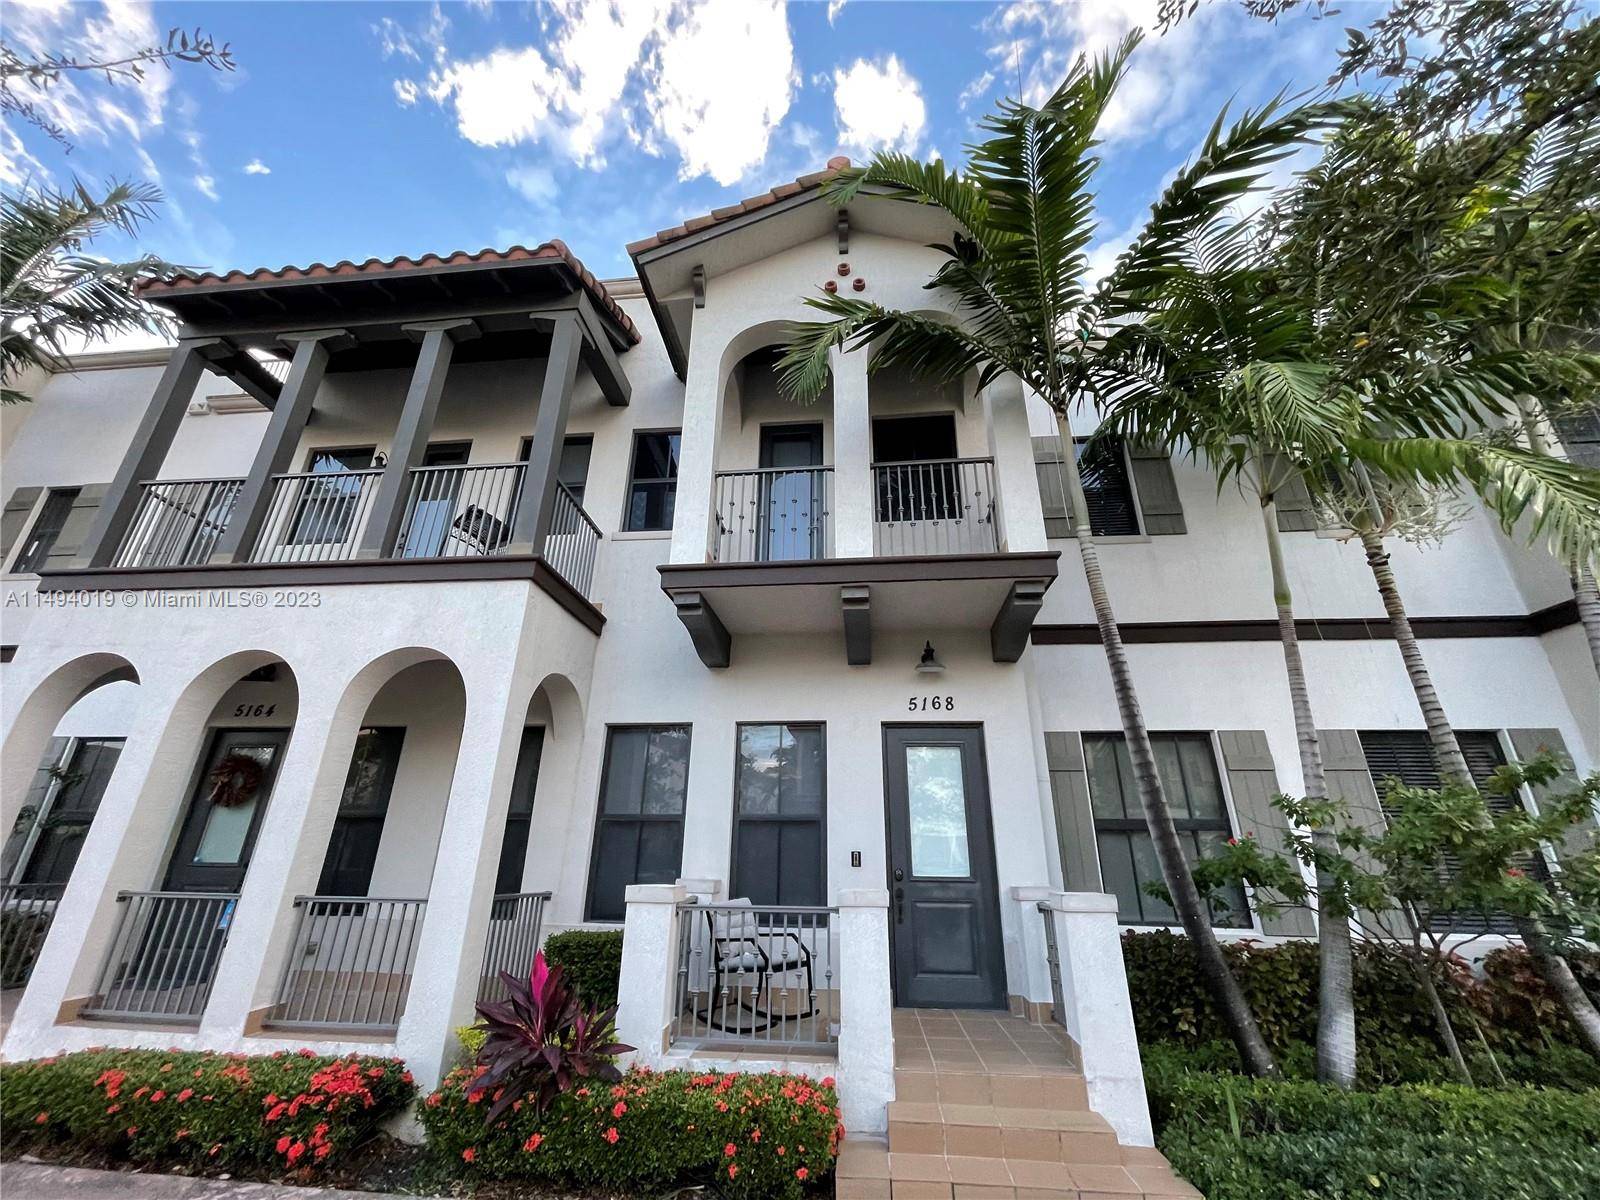 Townhome 3 bedrooms, 4 baths 1 den including full bath with Terrace and Grill, just steps away from Doral Best Tri Language Charter School.